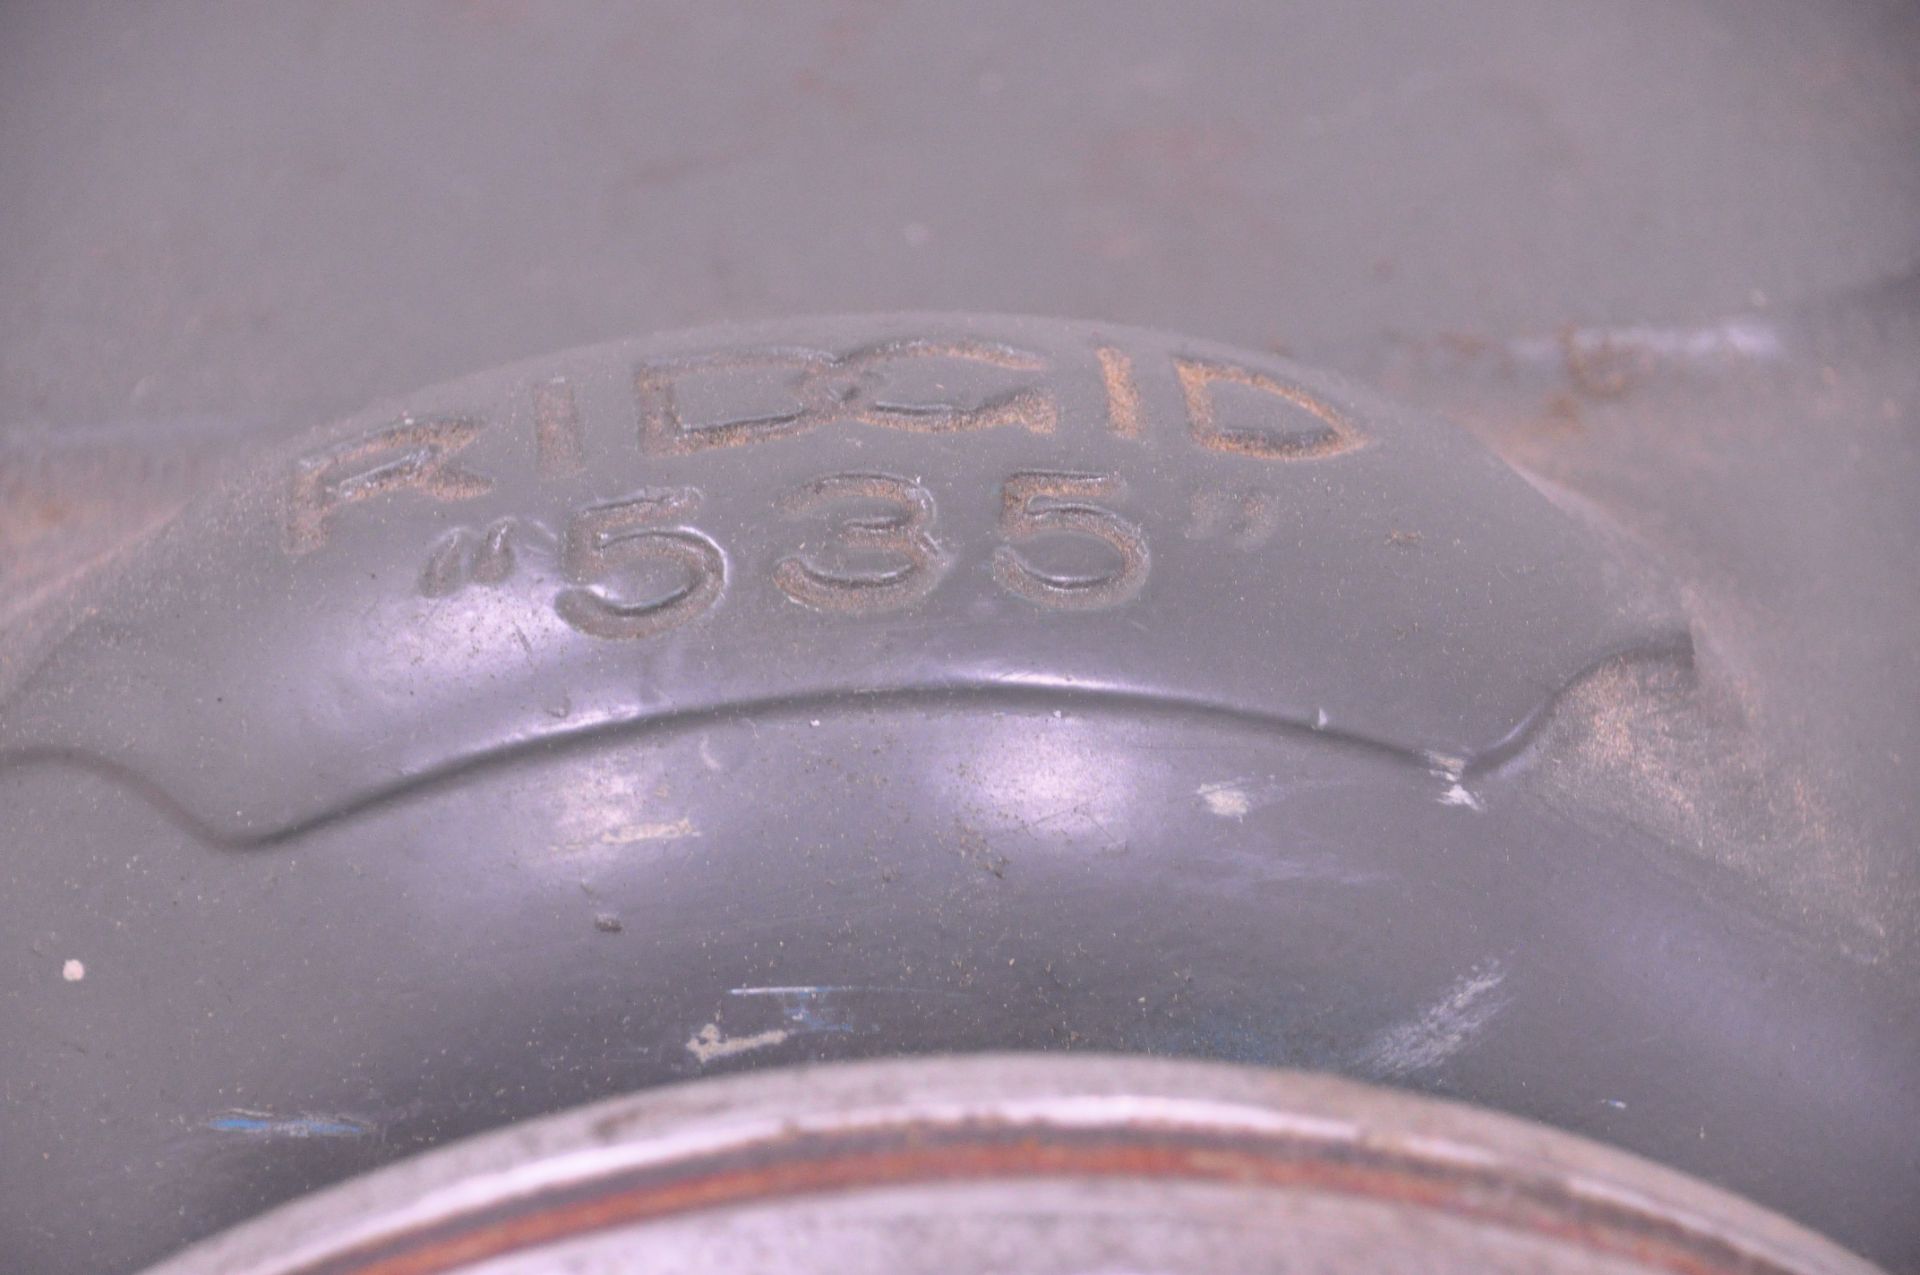 Ridgid No. 535 Portable Pipe Threader, S/n 312450, with Ridgid Universal Pipe Threading Die and - Image 4 of 4